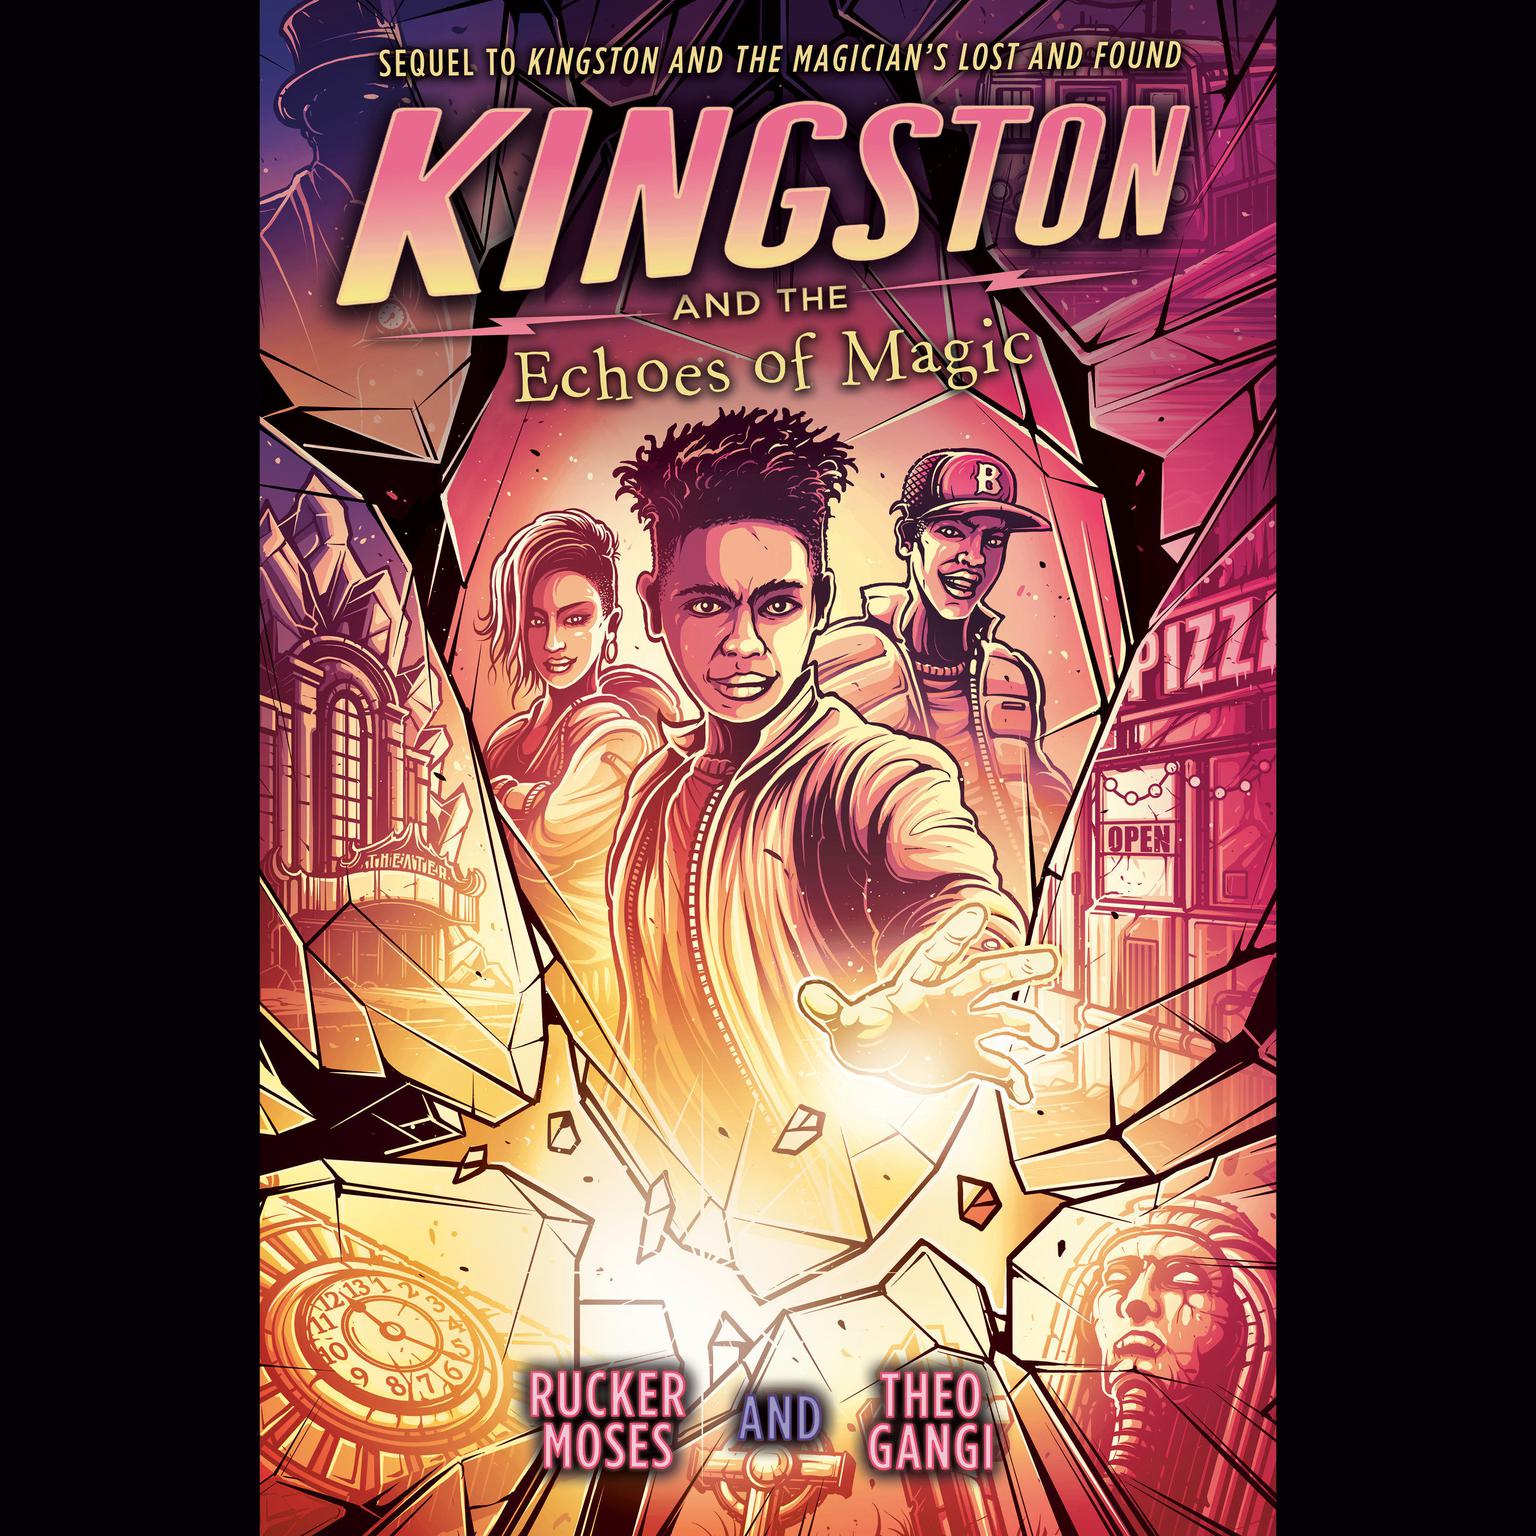 Kingston and the Echoes of Magic Audiobook, by Rucker Moses